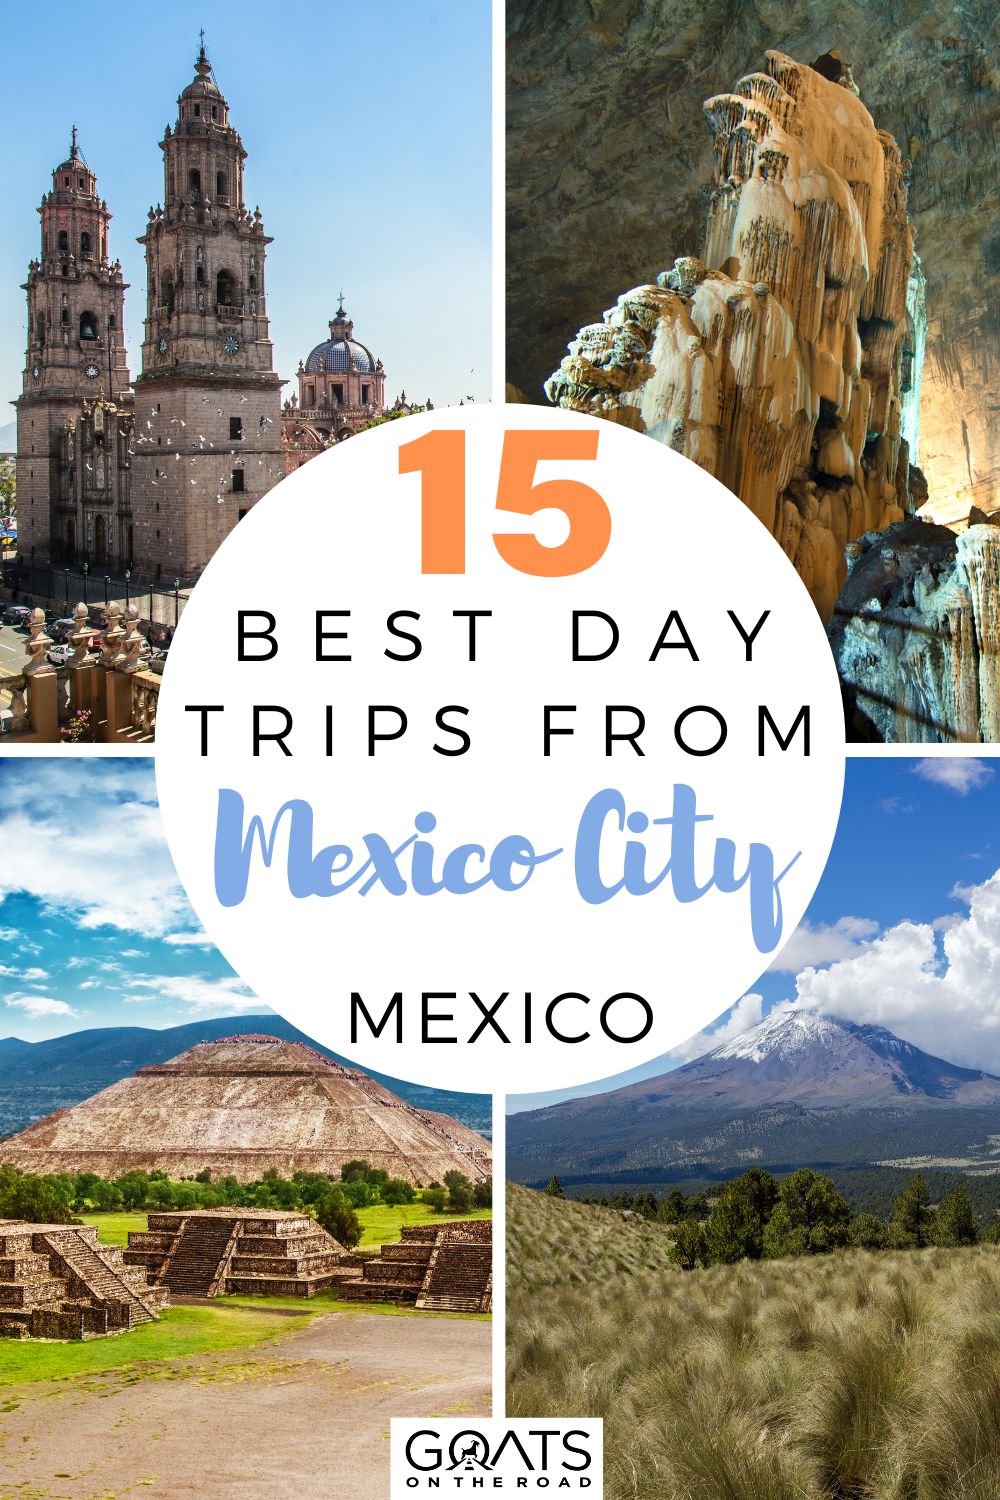 The Best Day Trips From Mexico City, Mexico